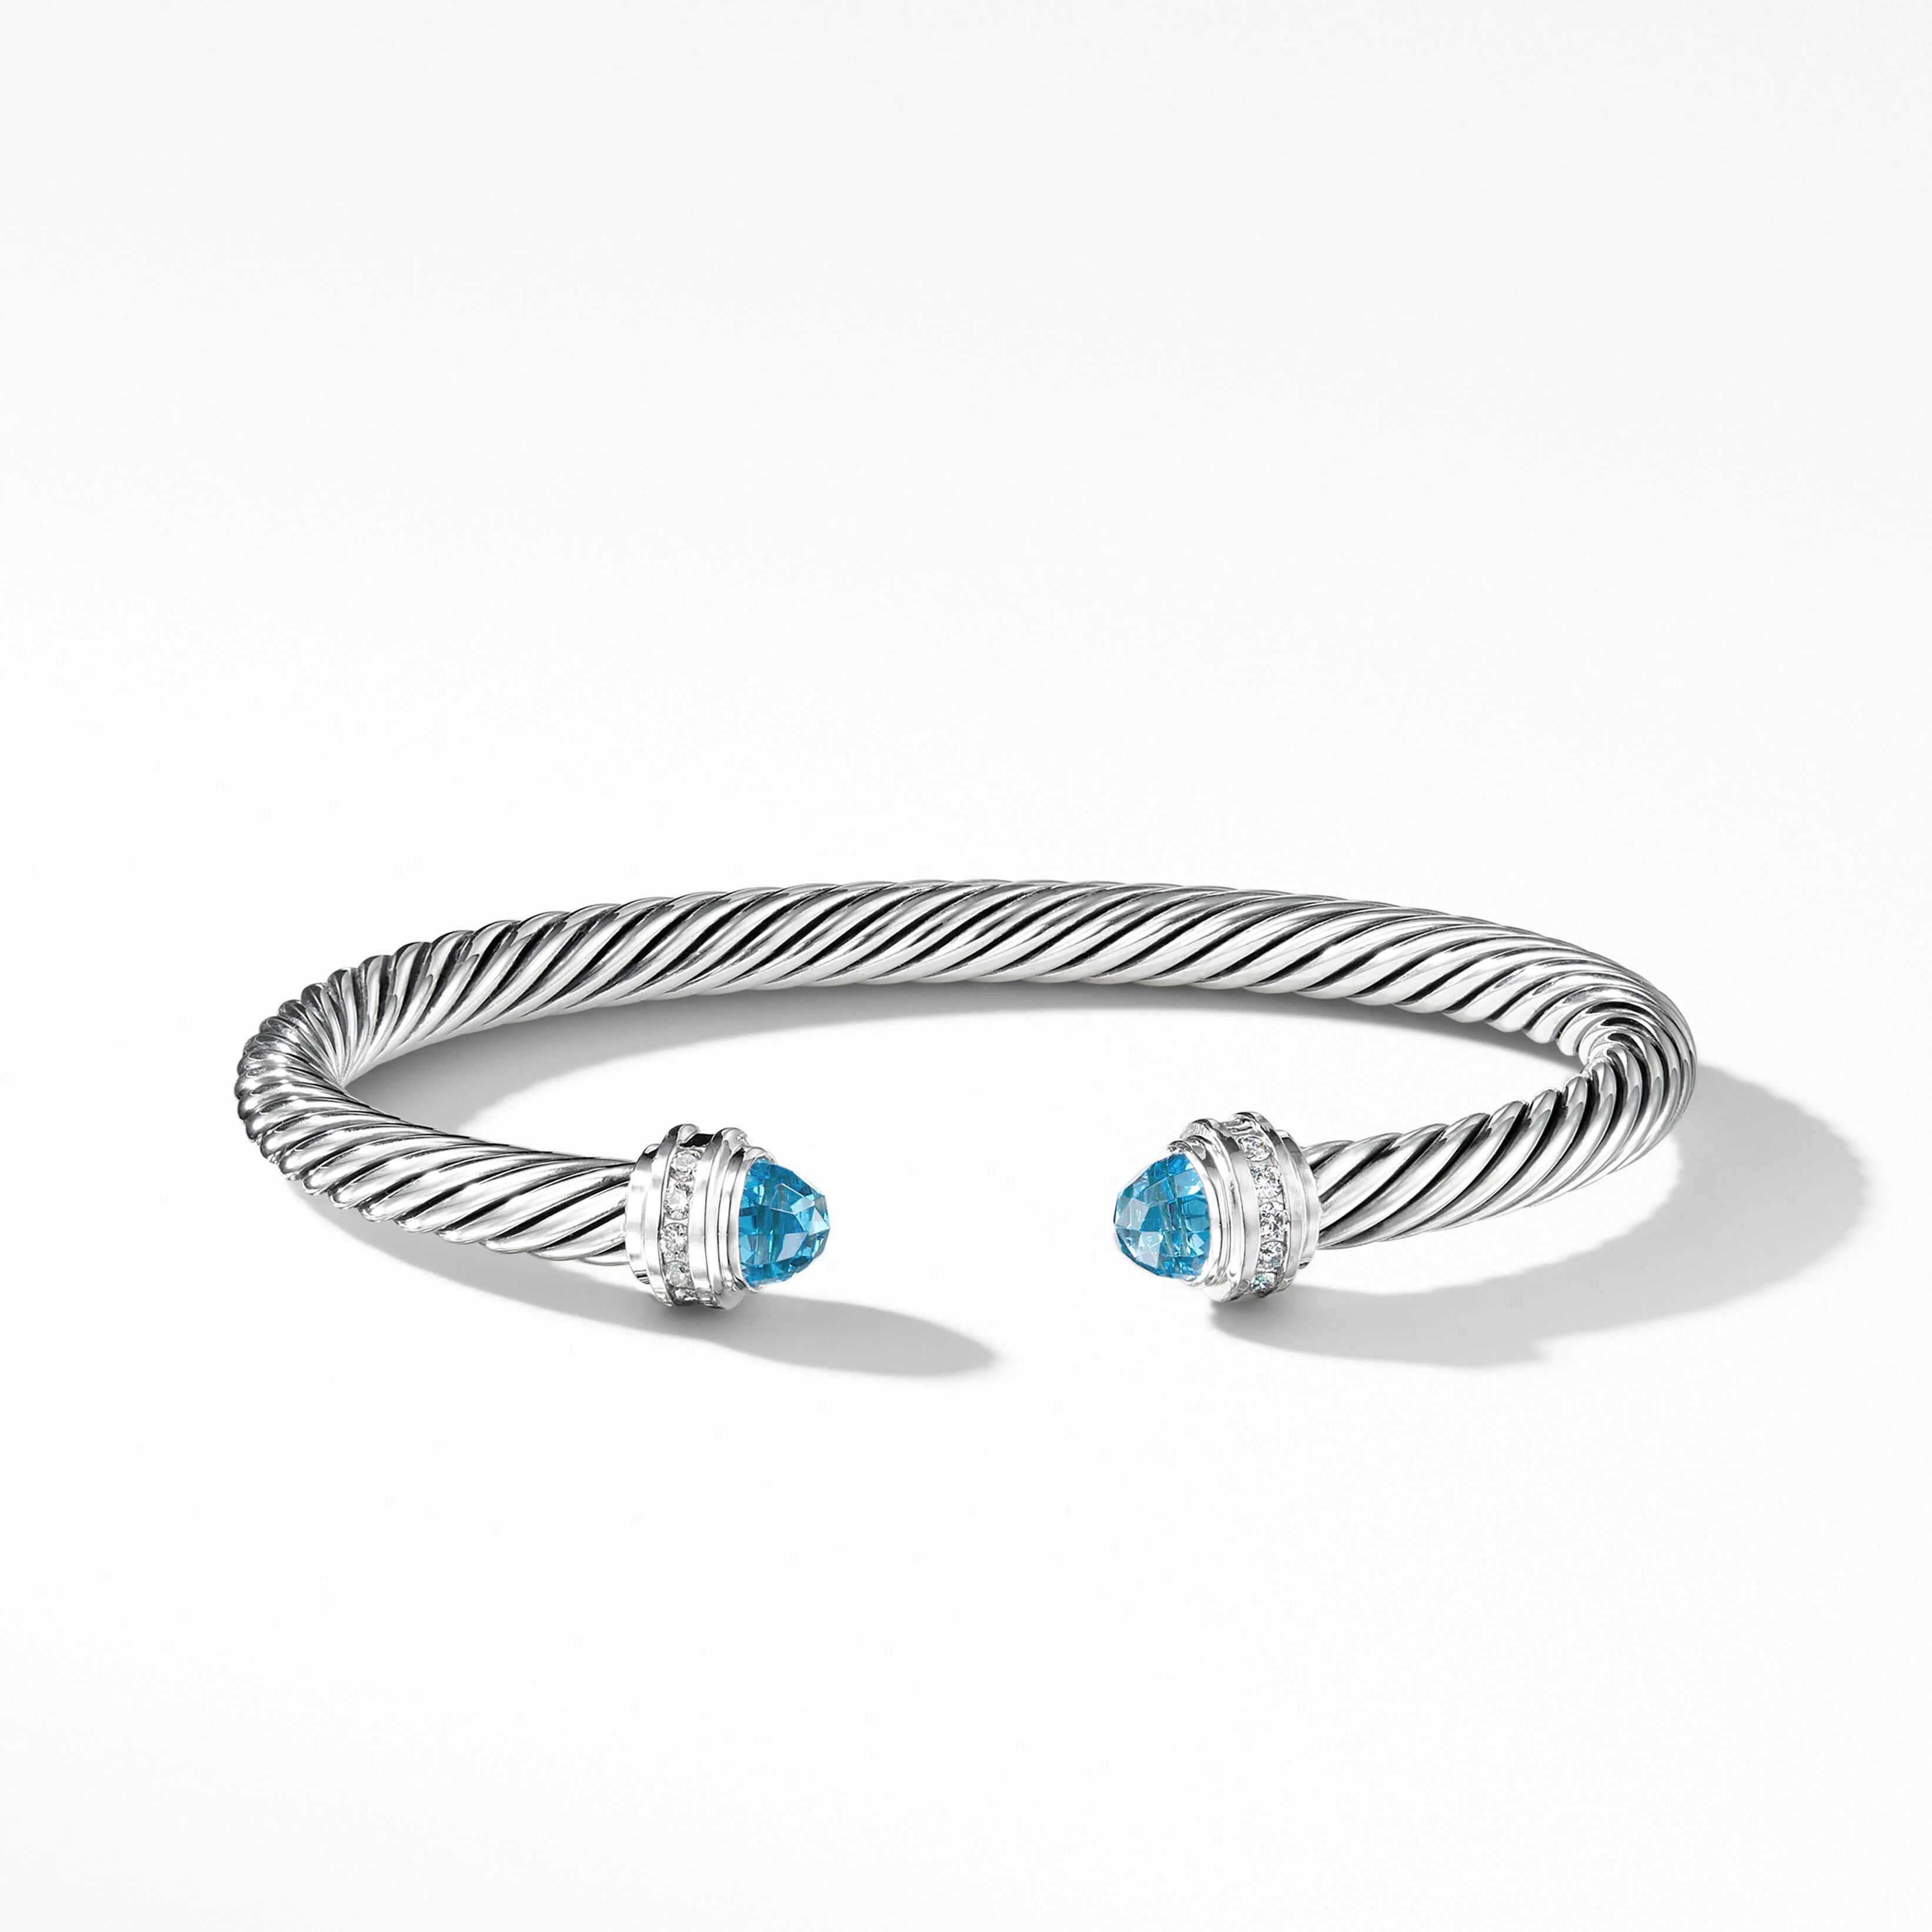 Cable Classics Bracelet in Sterling Silver with Blue Topaz and Pavé Diamonds | David Yurman